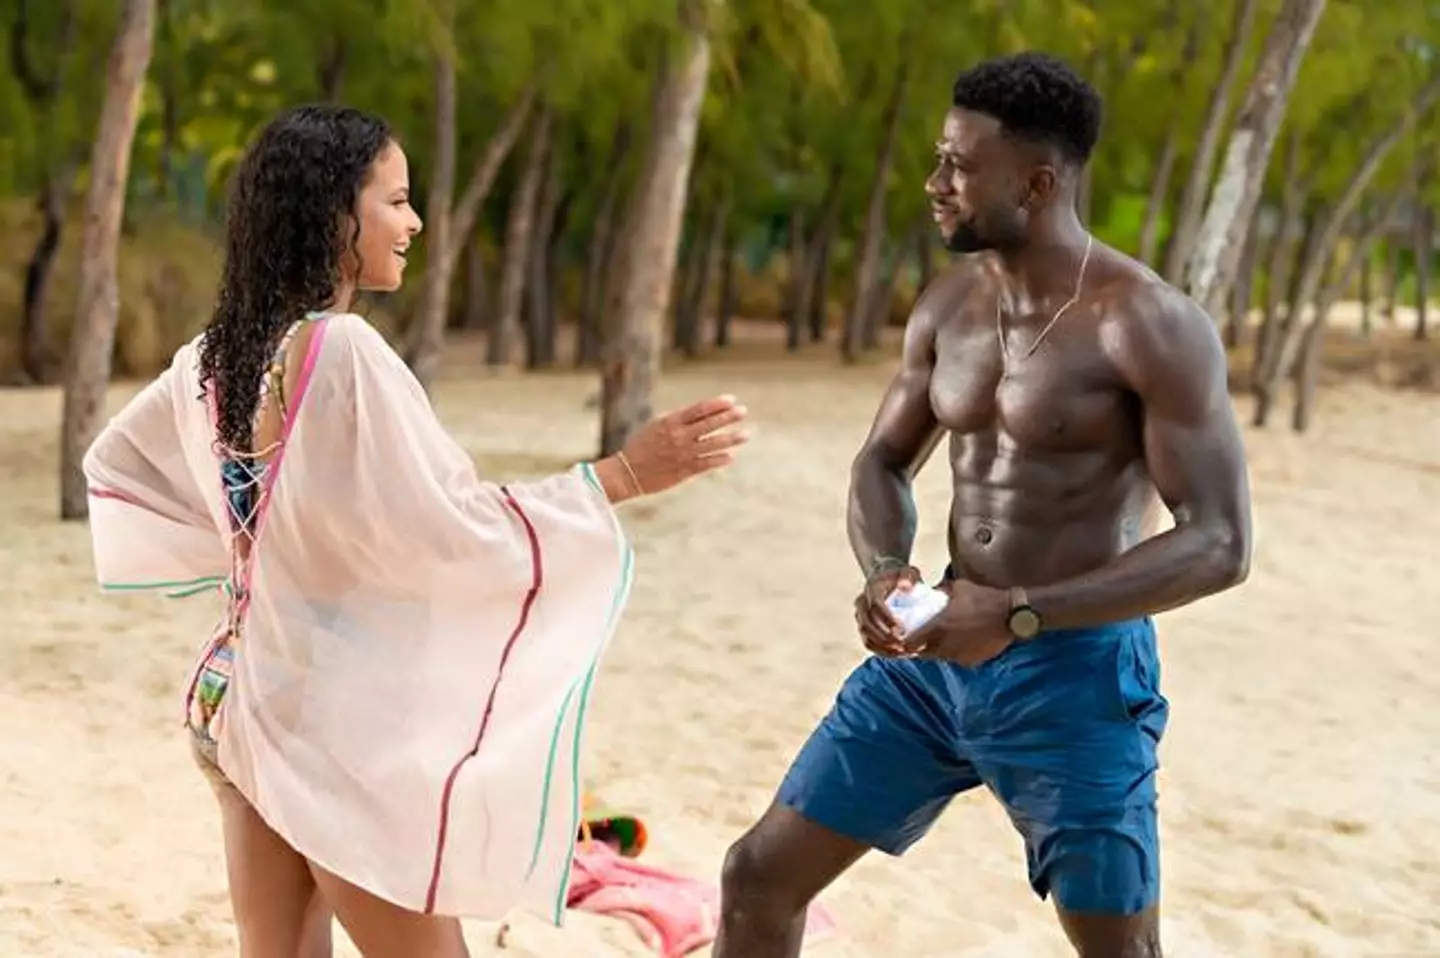 Erica (Christina Milian) and Caleb (Sinqua Walls) have a rendezvous at the beach (